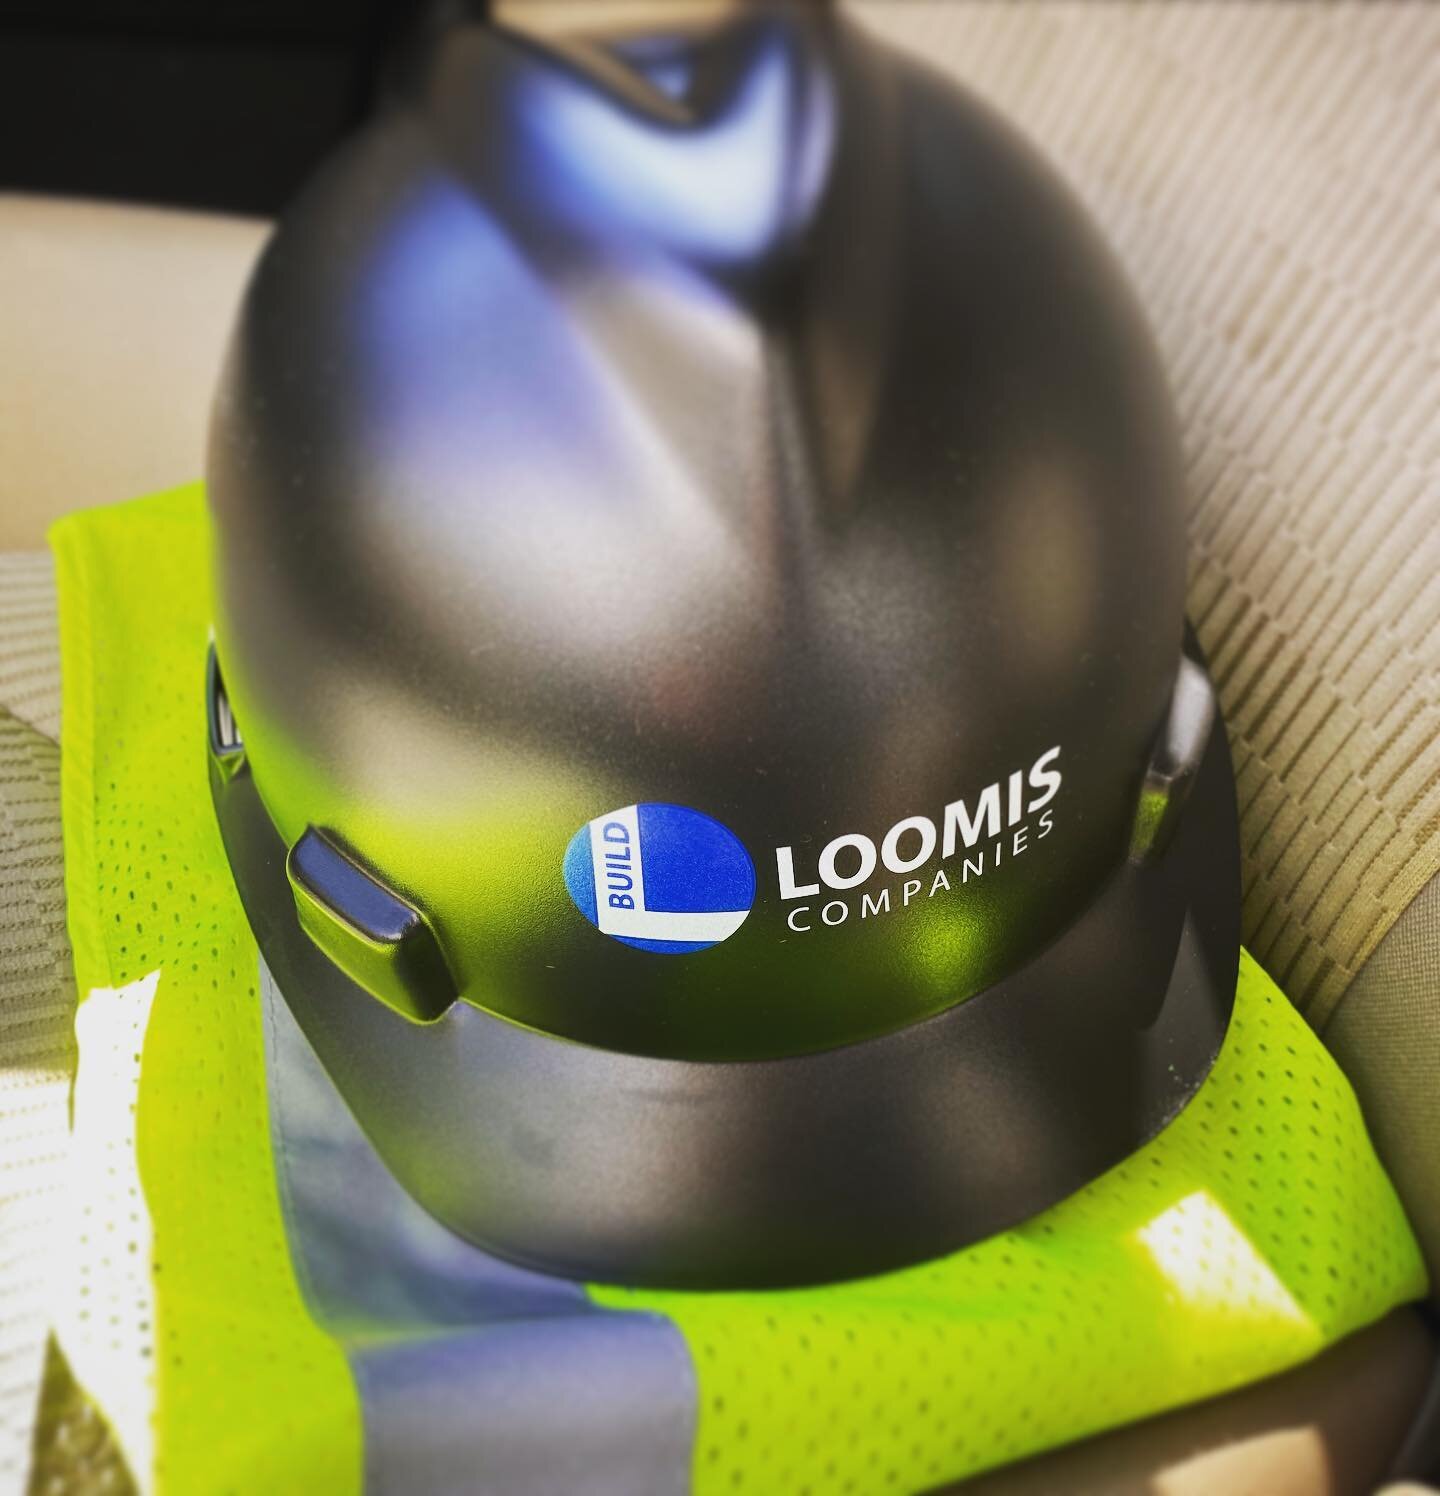 Some of our new gear! 
Loomis STRONG💪🏼
#buildcleveland #loomisbuild #clevelandconstruction -
-
-
#Construction #ConstructionIdeas #constructionalengineer #constructioncraneobsessionc #constructionsheet #Constructionmaterials #constructionplans #con